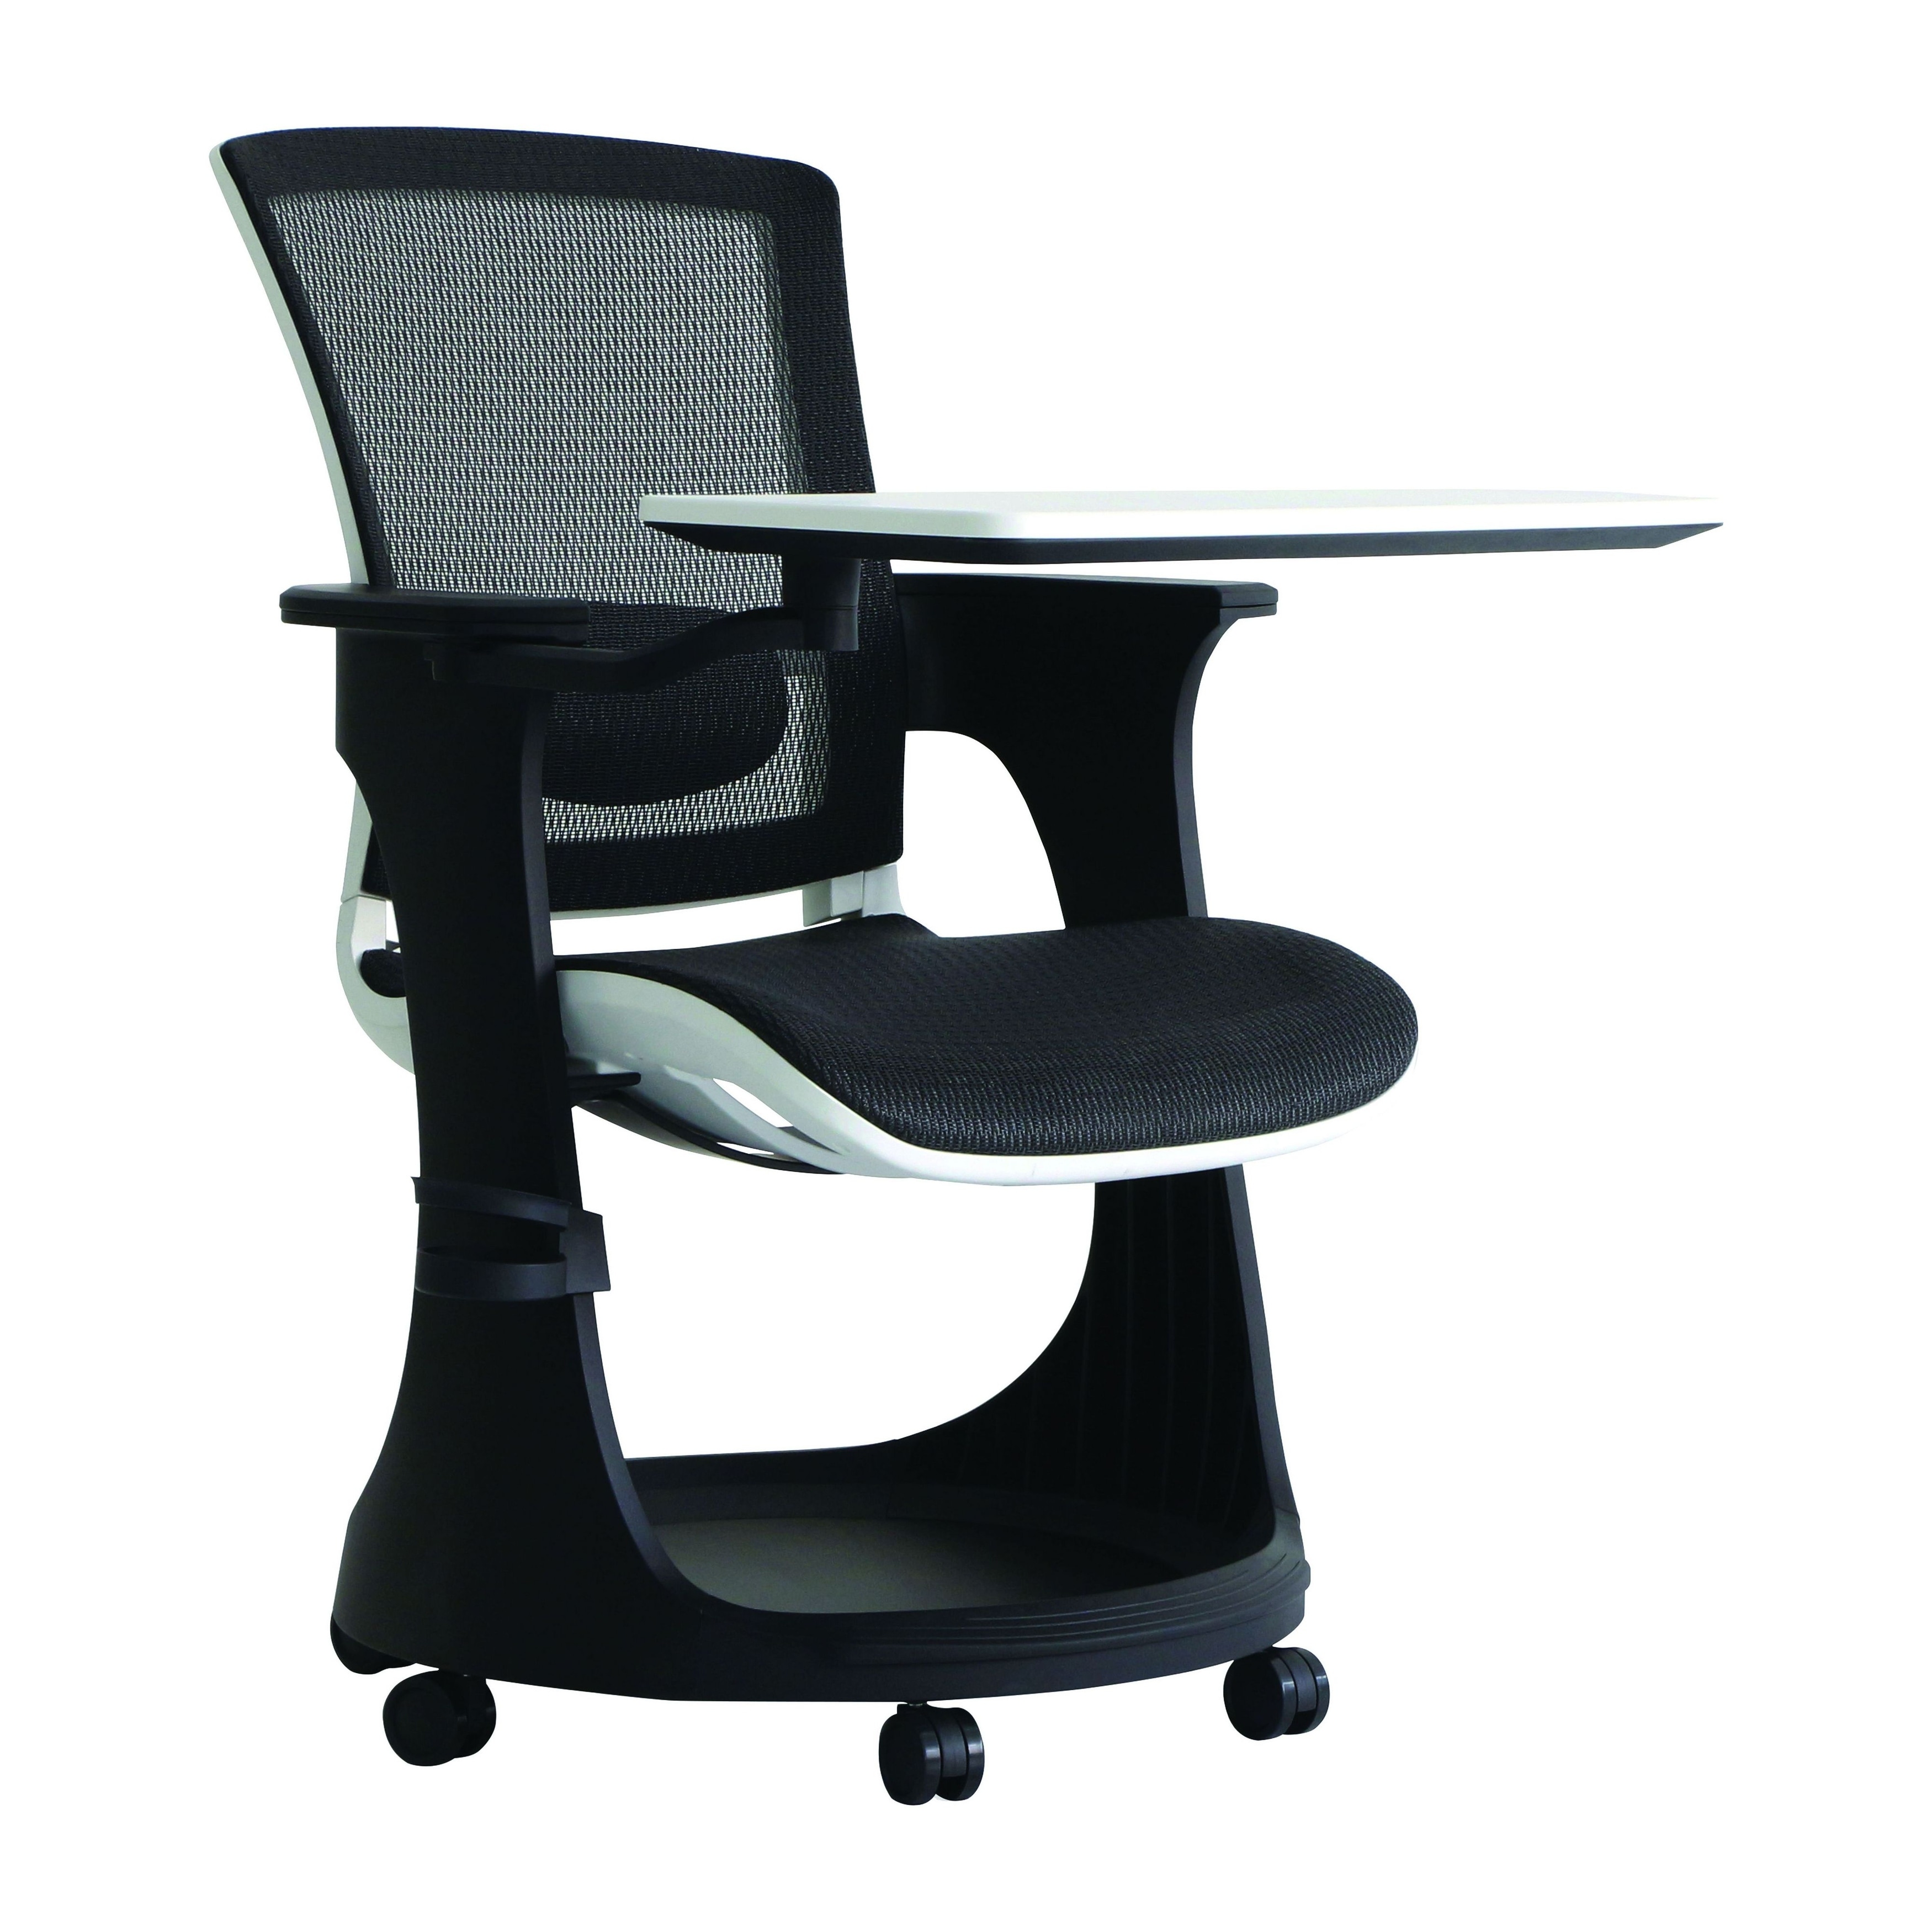 Eurotech Seating Eduskate Rolling Chair w/ Desk and Storage